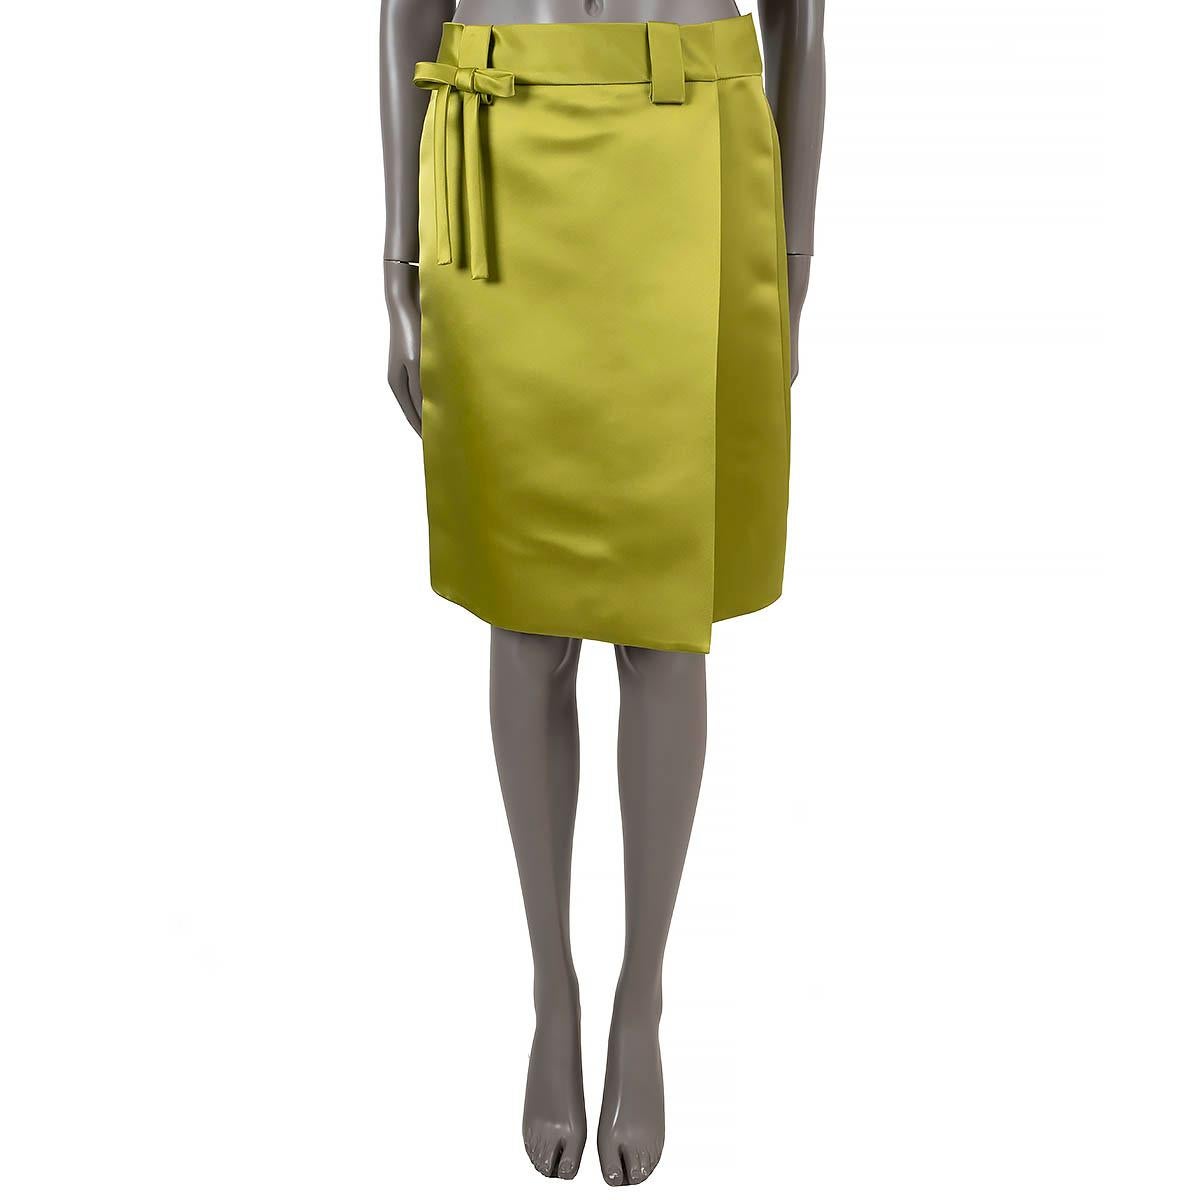 100% authentic Prada wrap skirt in lime silk (100%). Features a embellished bow, belt loops and one slit-pockets in the back with triangle logo. Closes on the front with a concealed button and hooks. Unlined. Has been worn and is in excellent